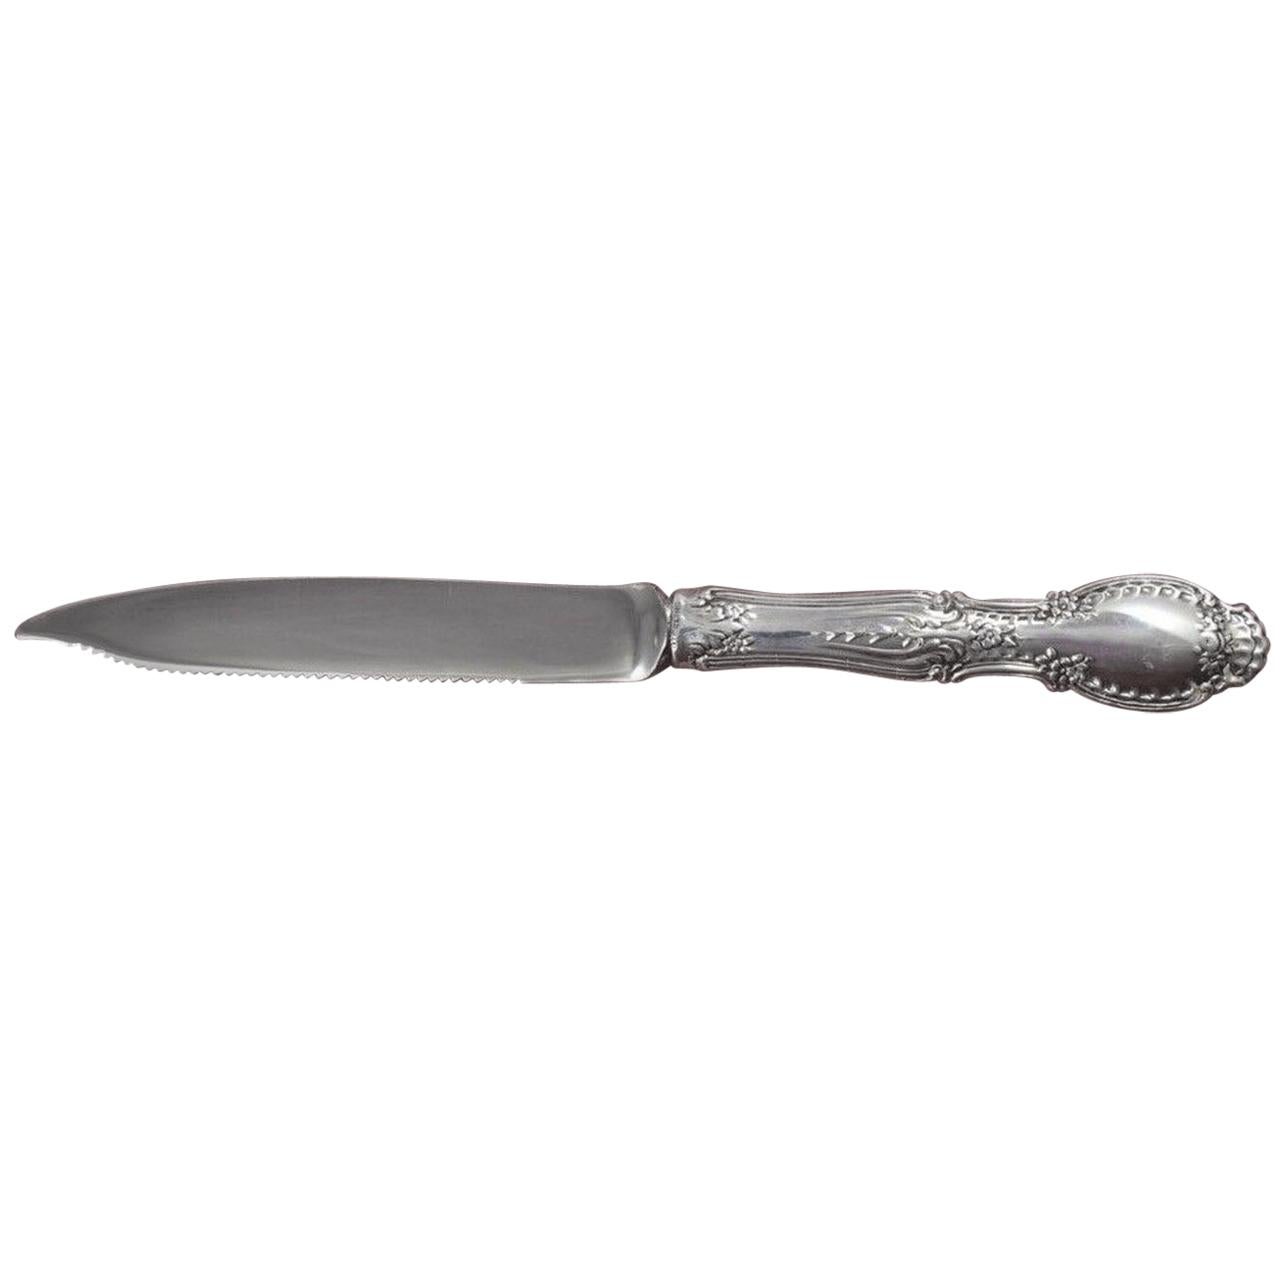 Richelieu by Tiffany Sterling Silver Fruit Knife Serrated with Pointed Blade